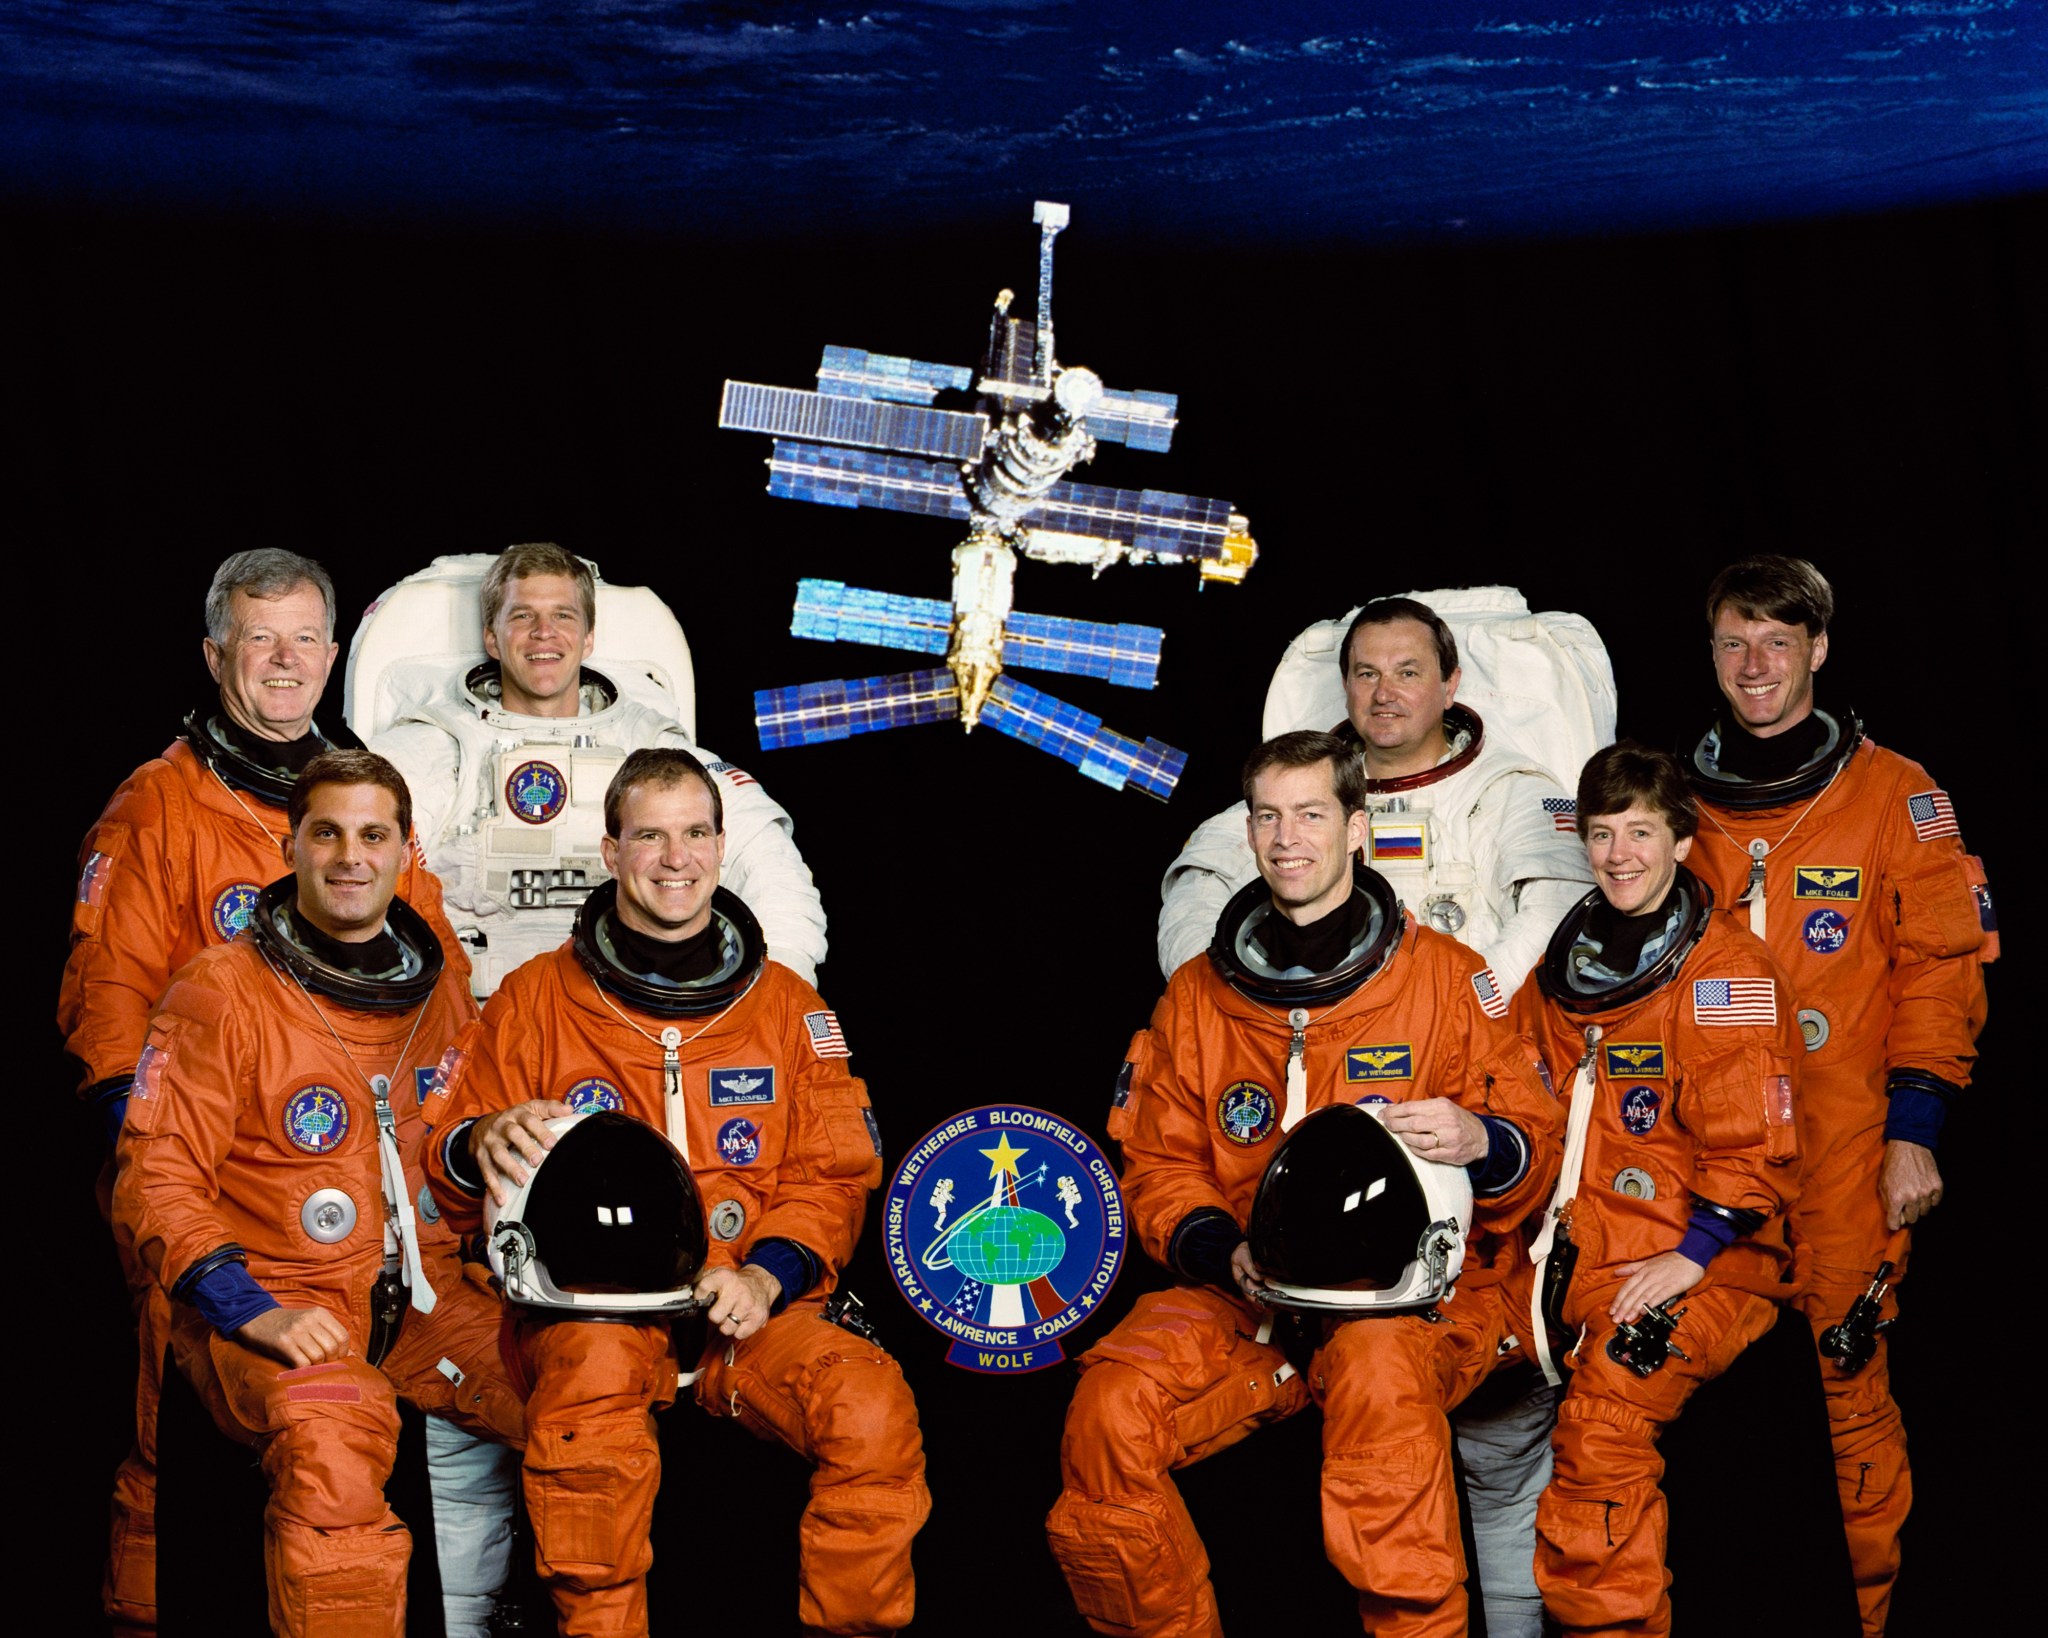 The official STS-86 crew portrait with a view of the Mir space station in the background.